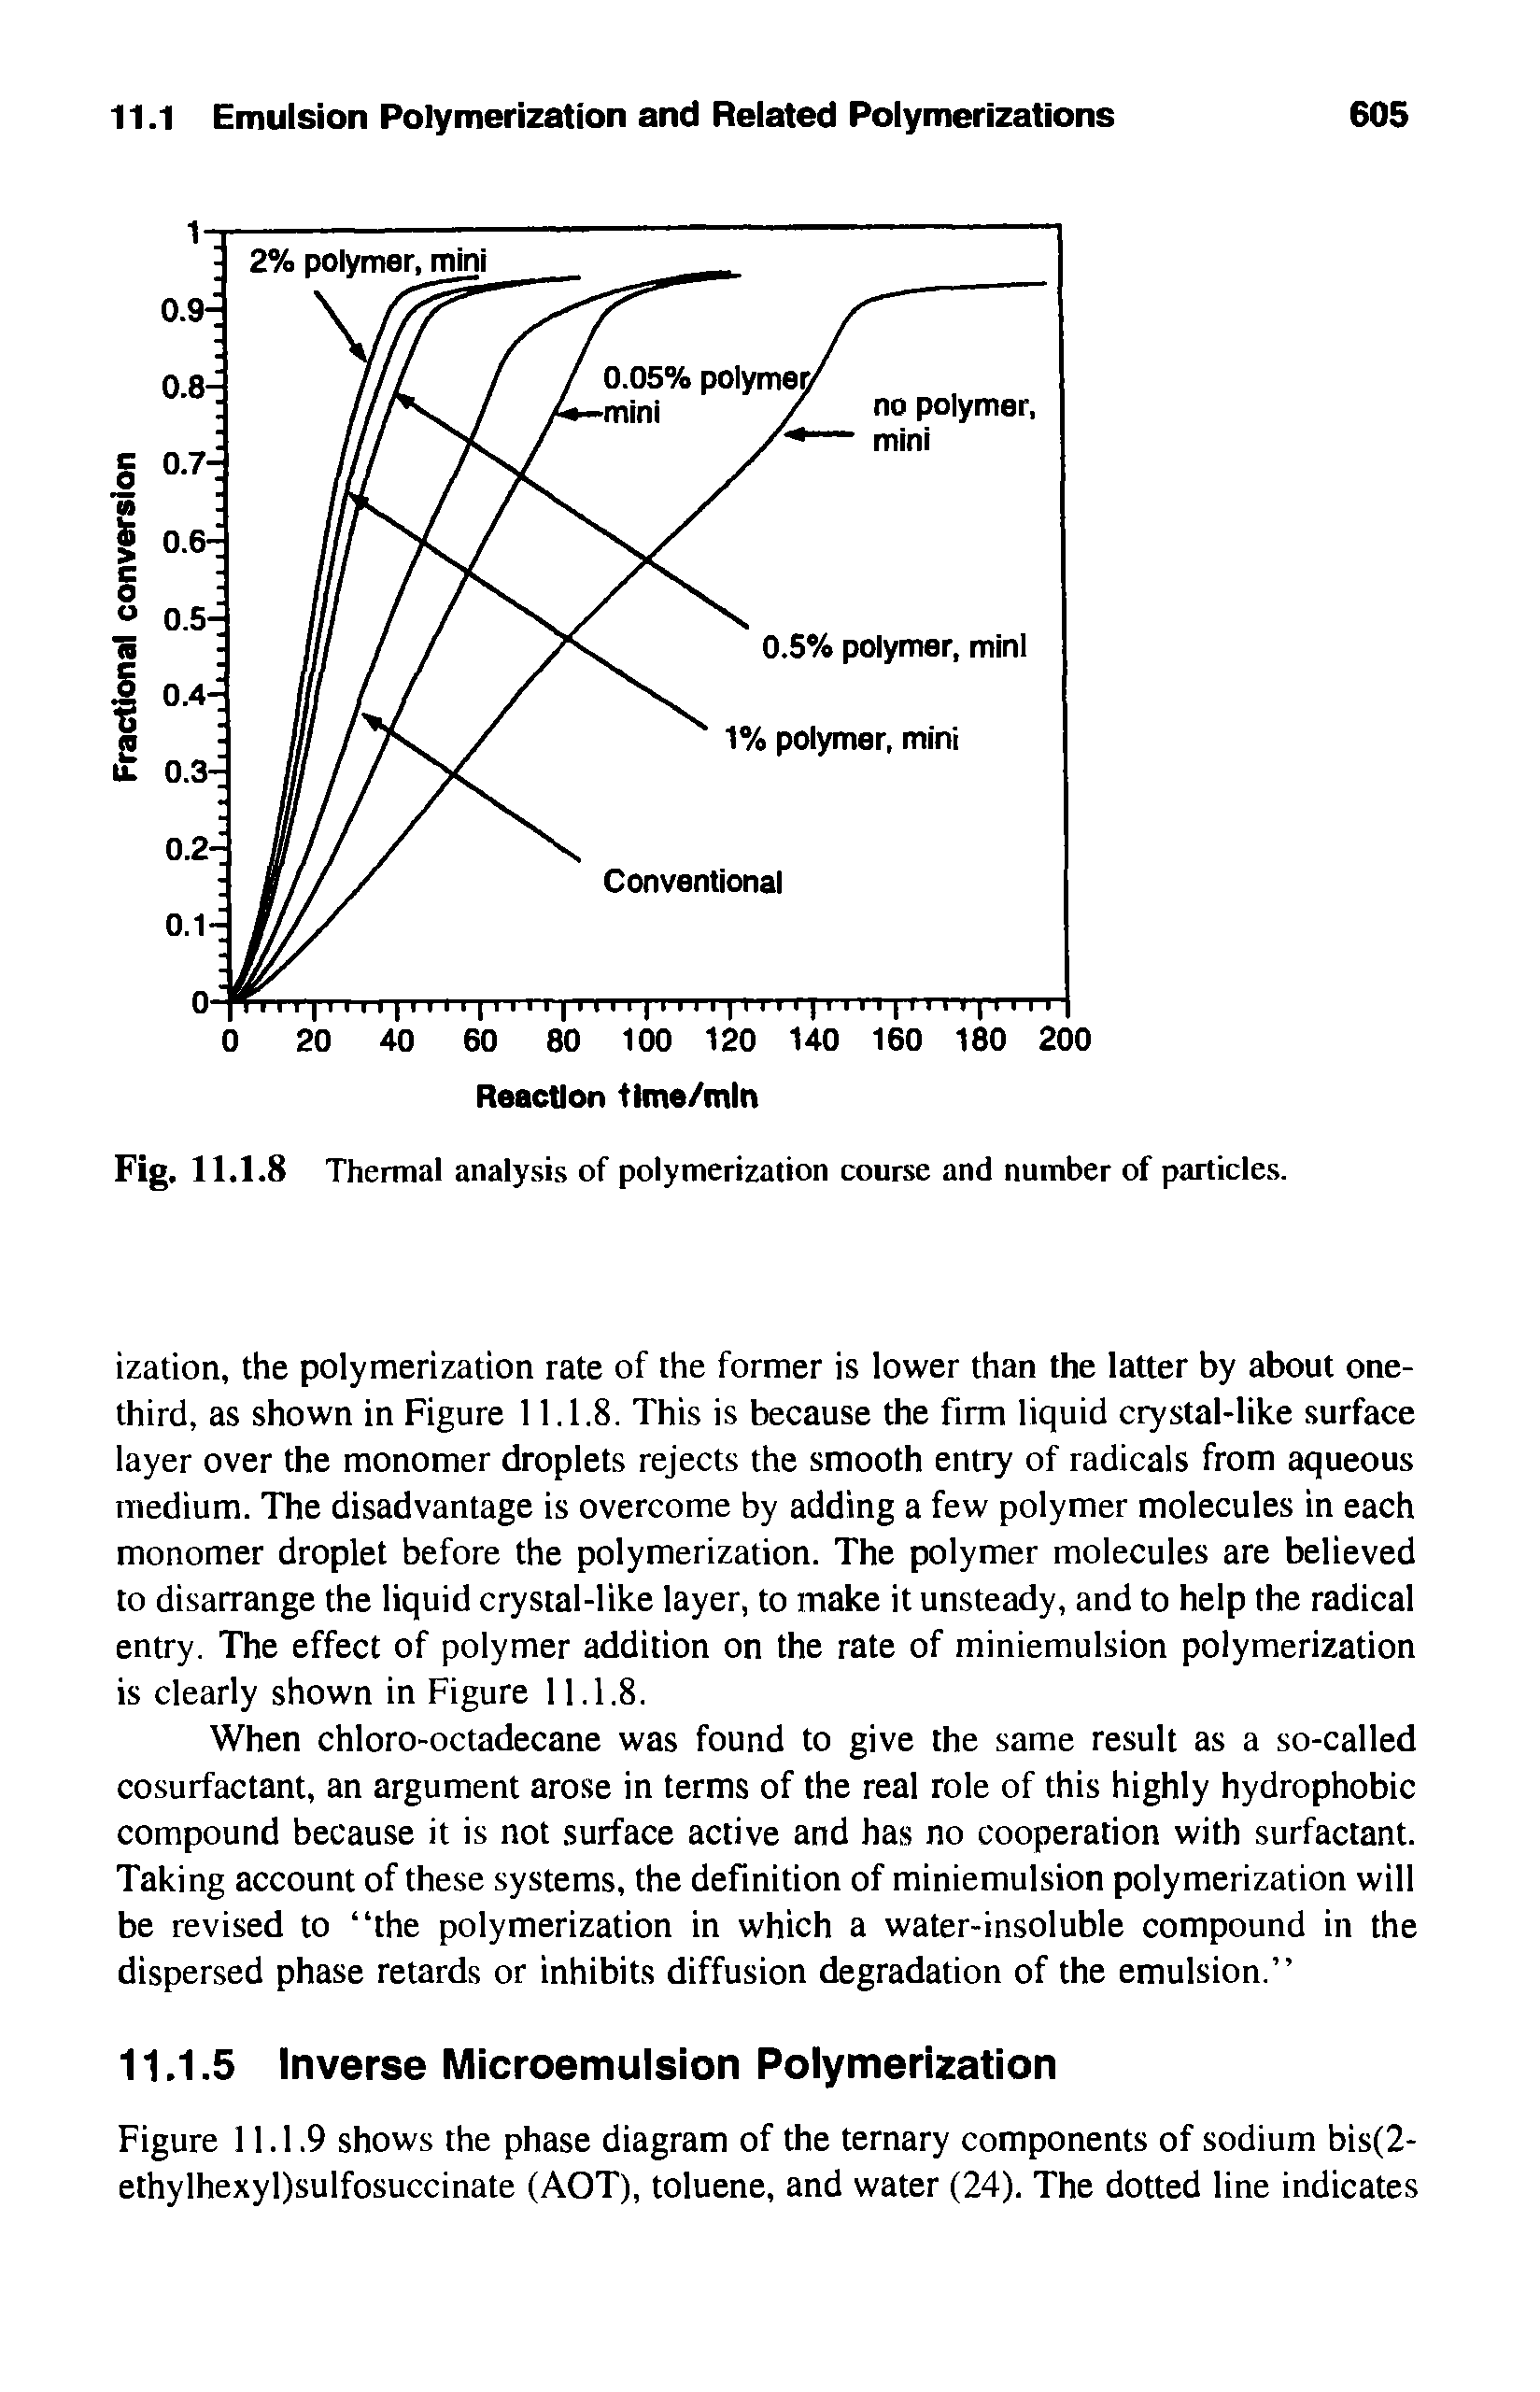 Fig. 11.1.8 Thermal analysis of polymerization course and number of particles.